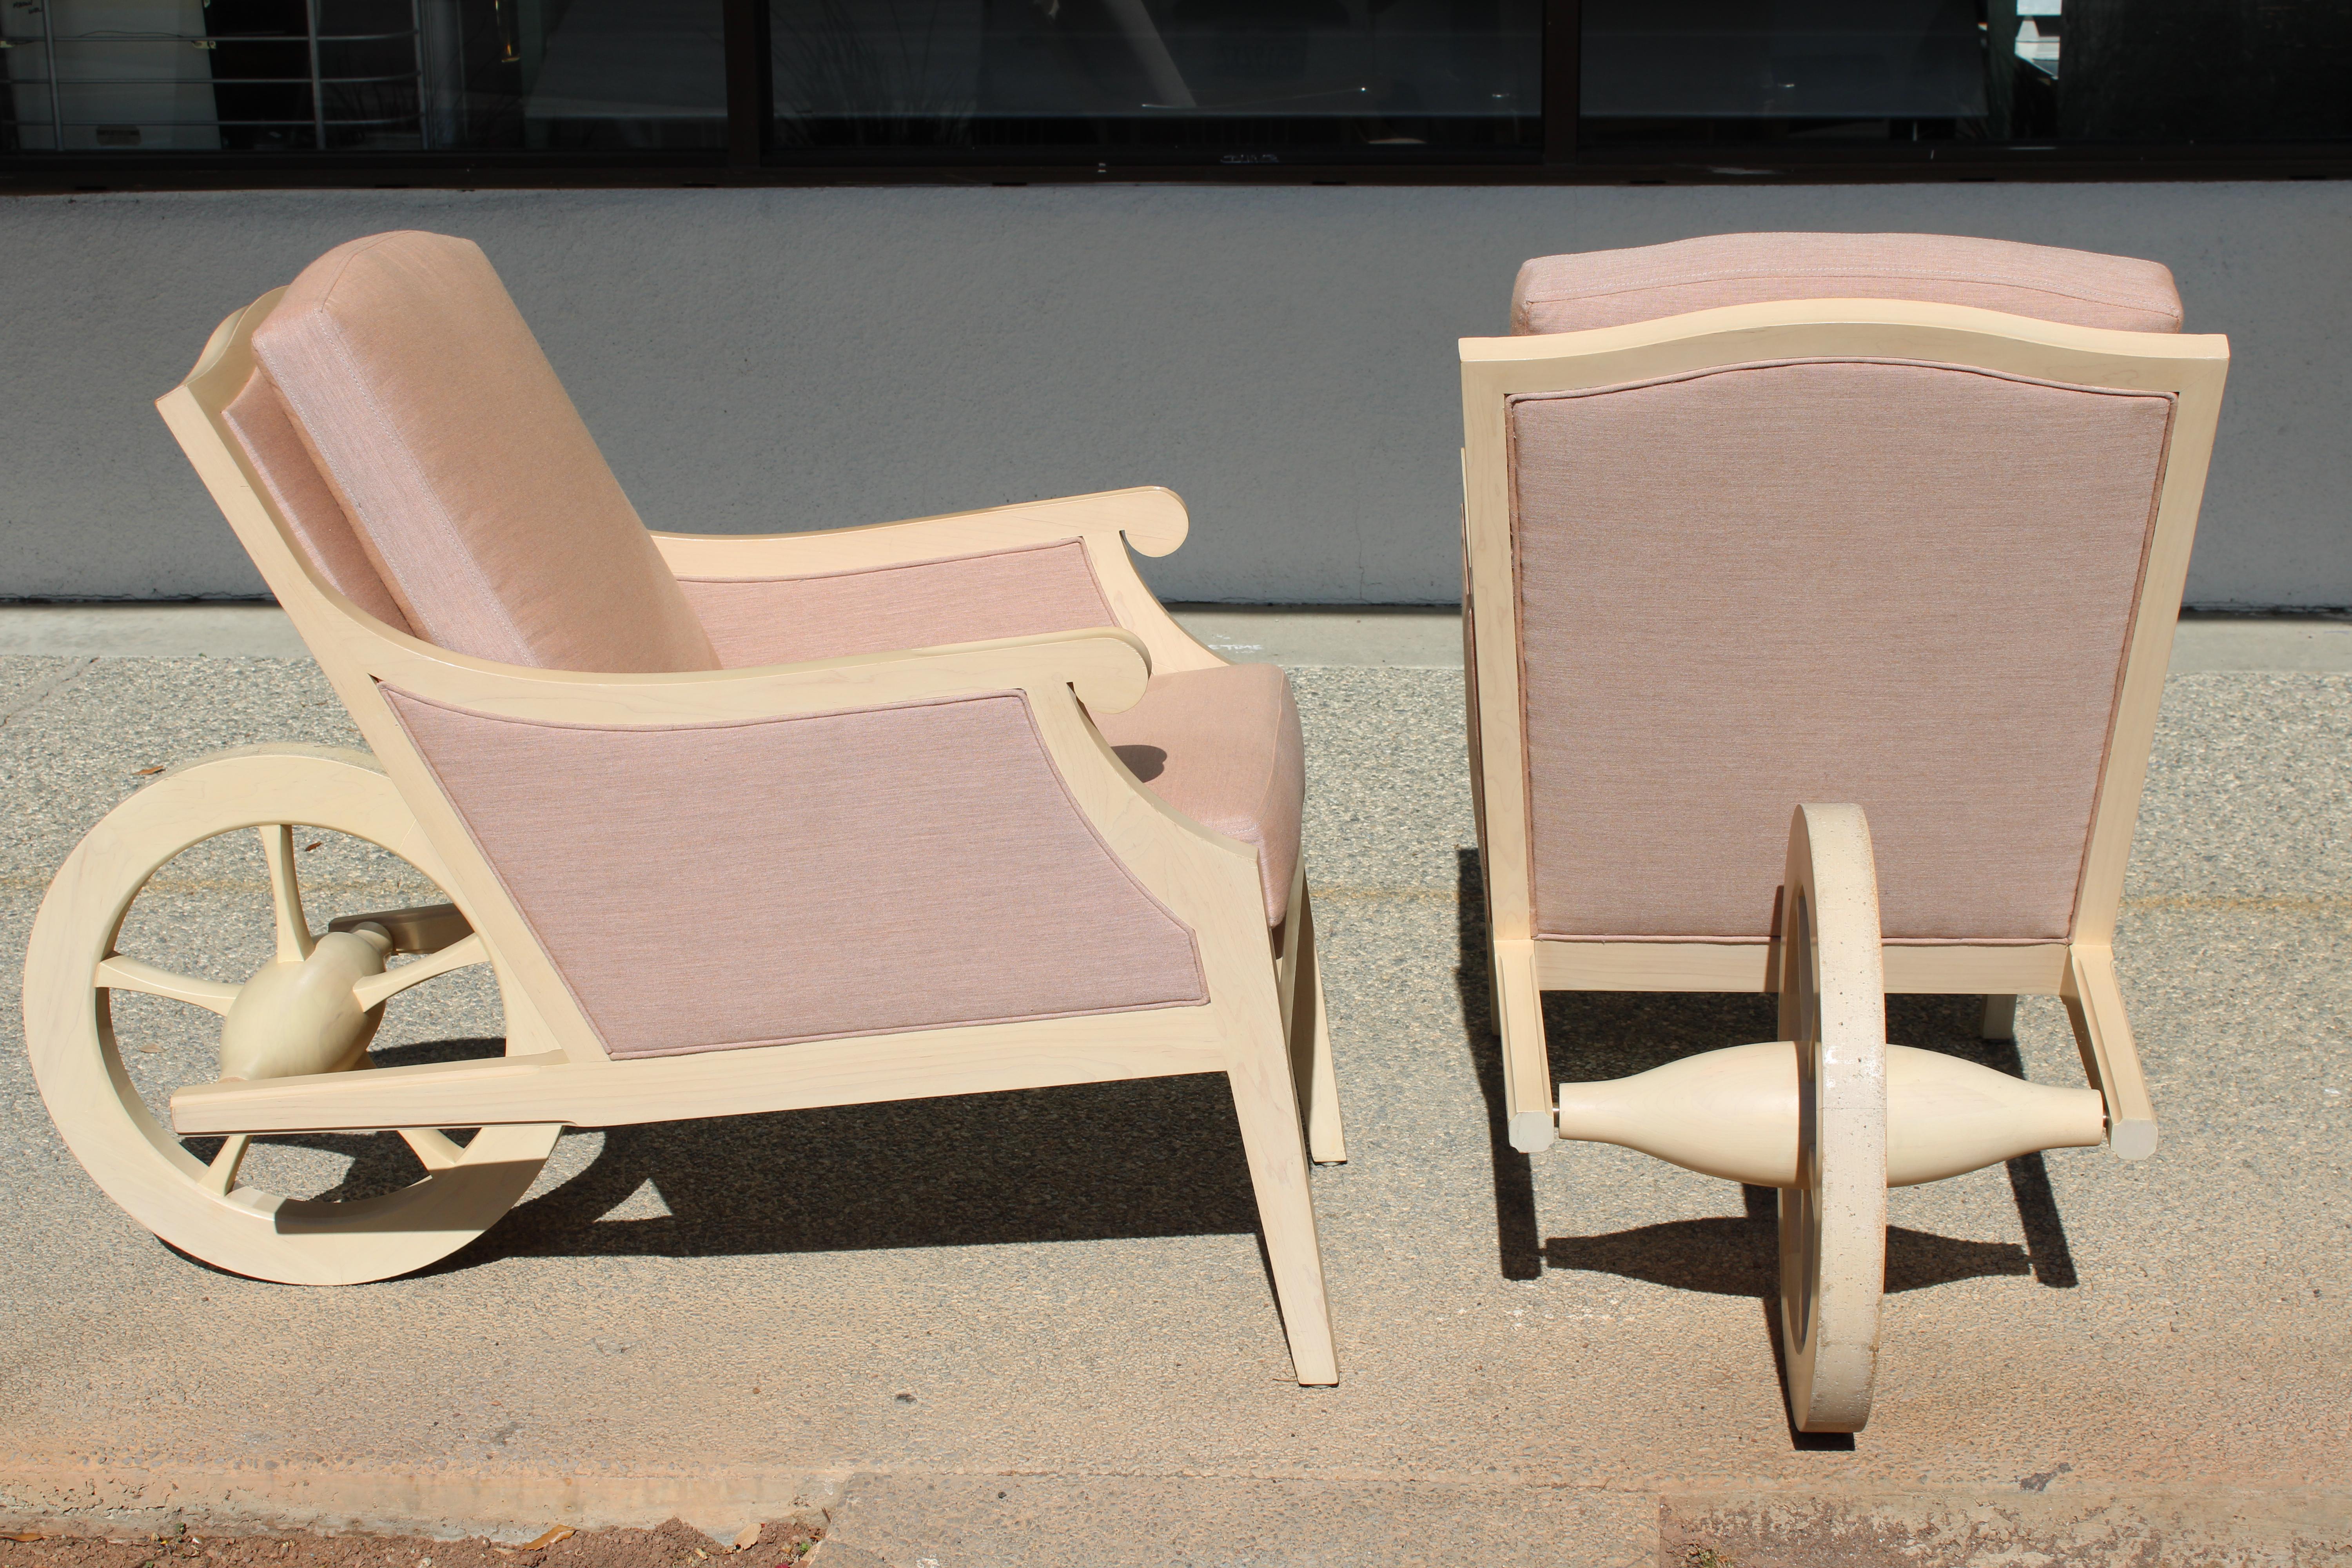 Pair of Man Ray lounge chairs designed by Philippe Starck for the Clift Royal Sonesta Hotel, San Francisco, CA., circa 2000. Chairs have been professionally refinished and reupholstered in Sunbrella fabric. Chairs measures 22.5